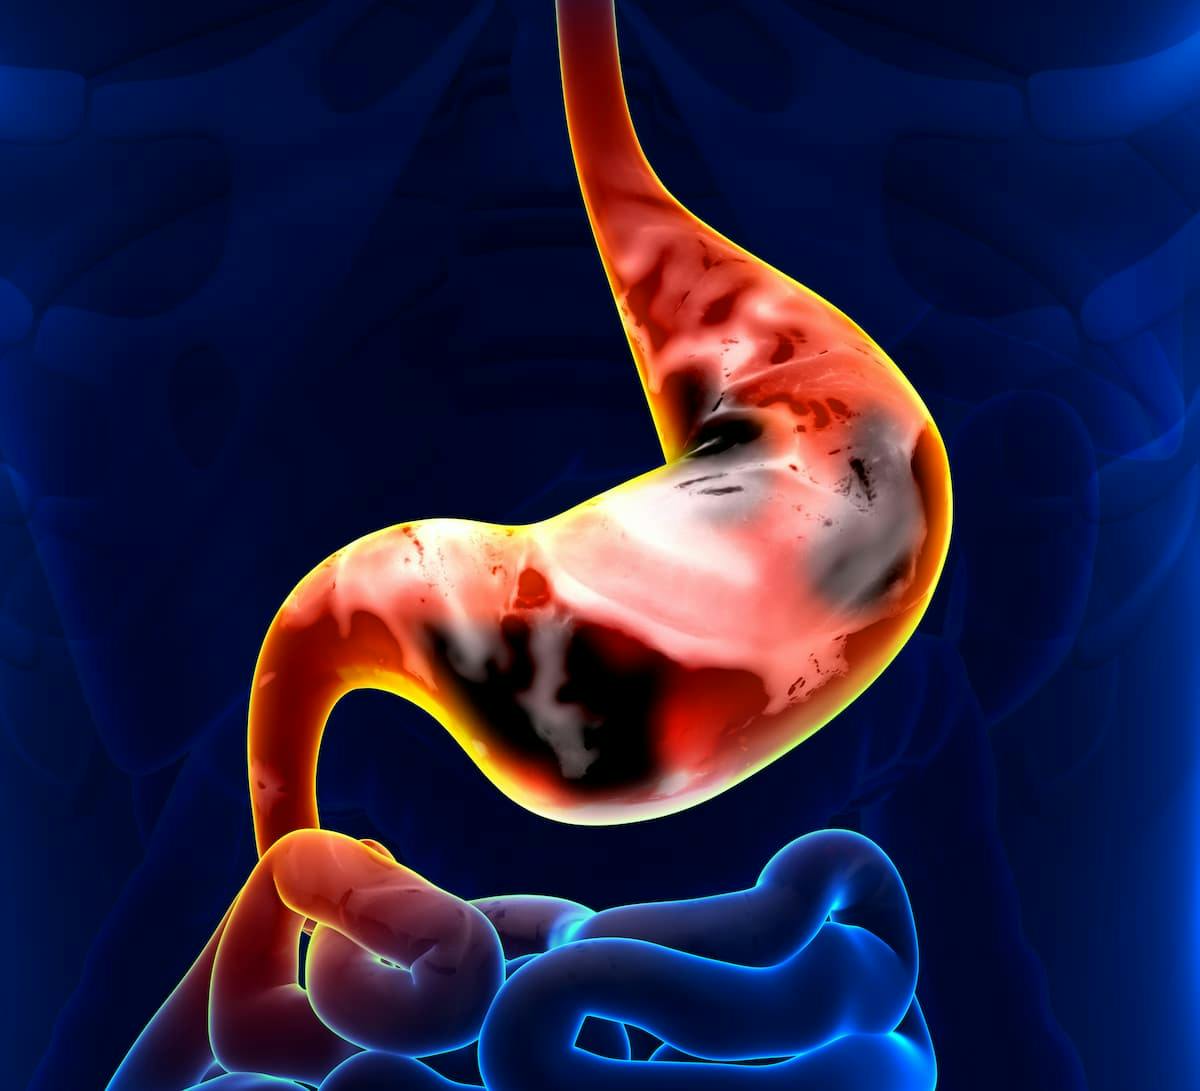 CMG901 demonstrated a well-tolerated safety profile in patients with CLDN18.2-positive, advanced gastric/gastroesophageal junction cancer. 